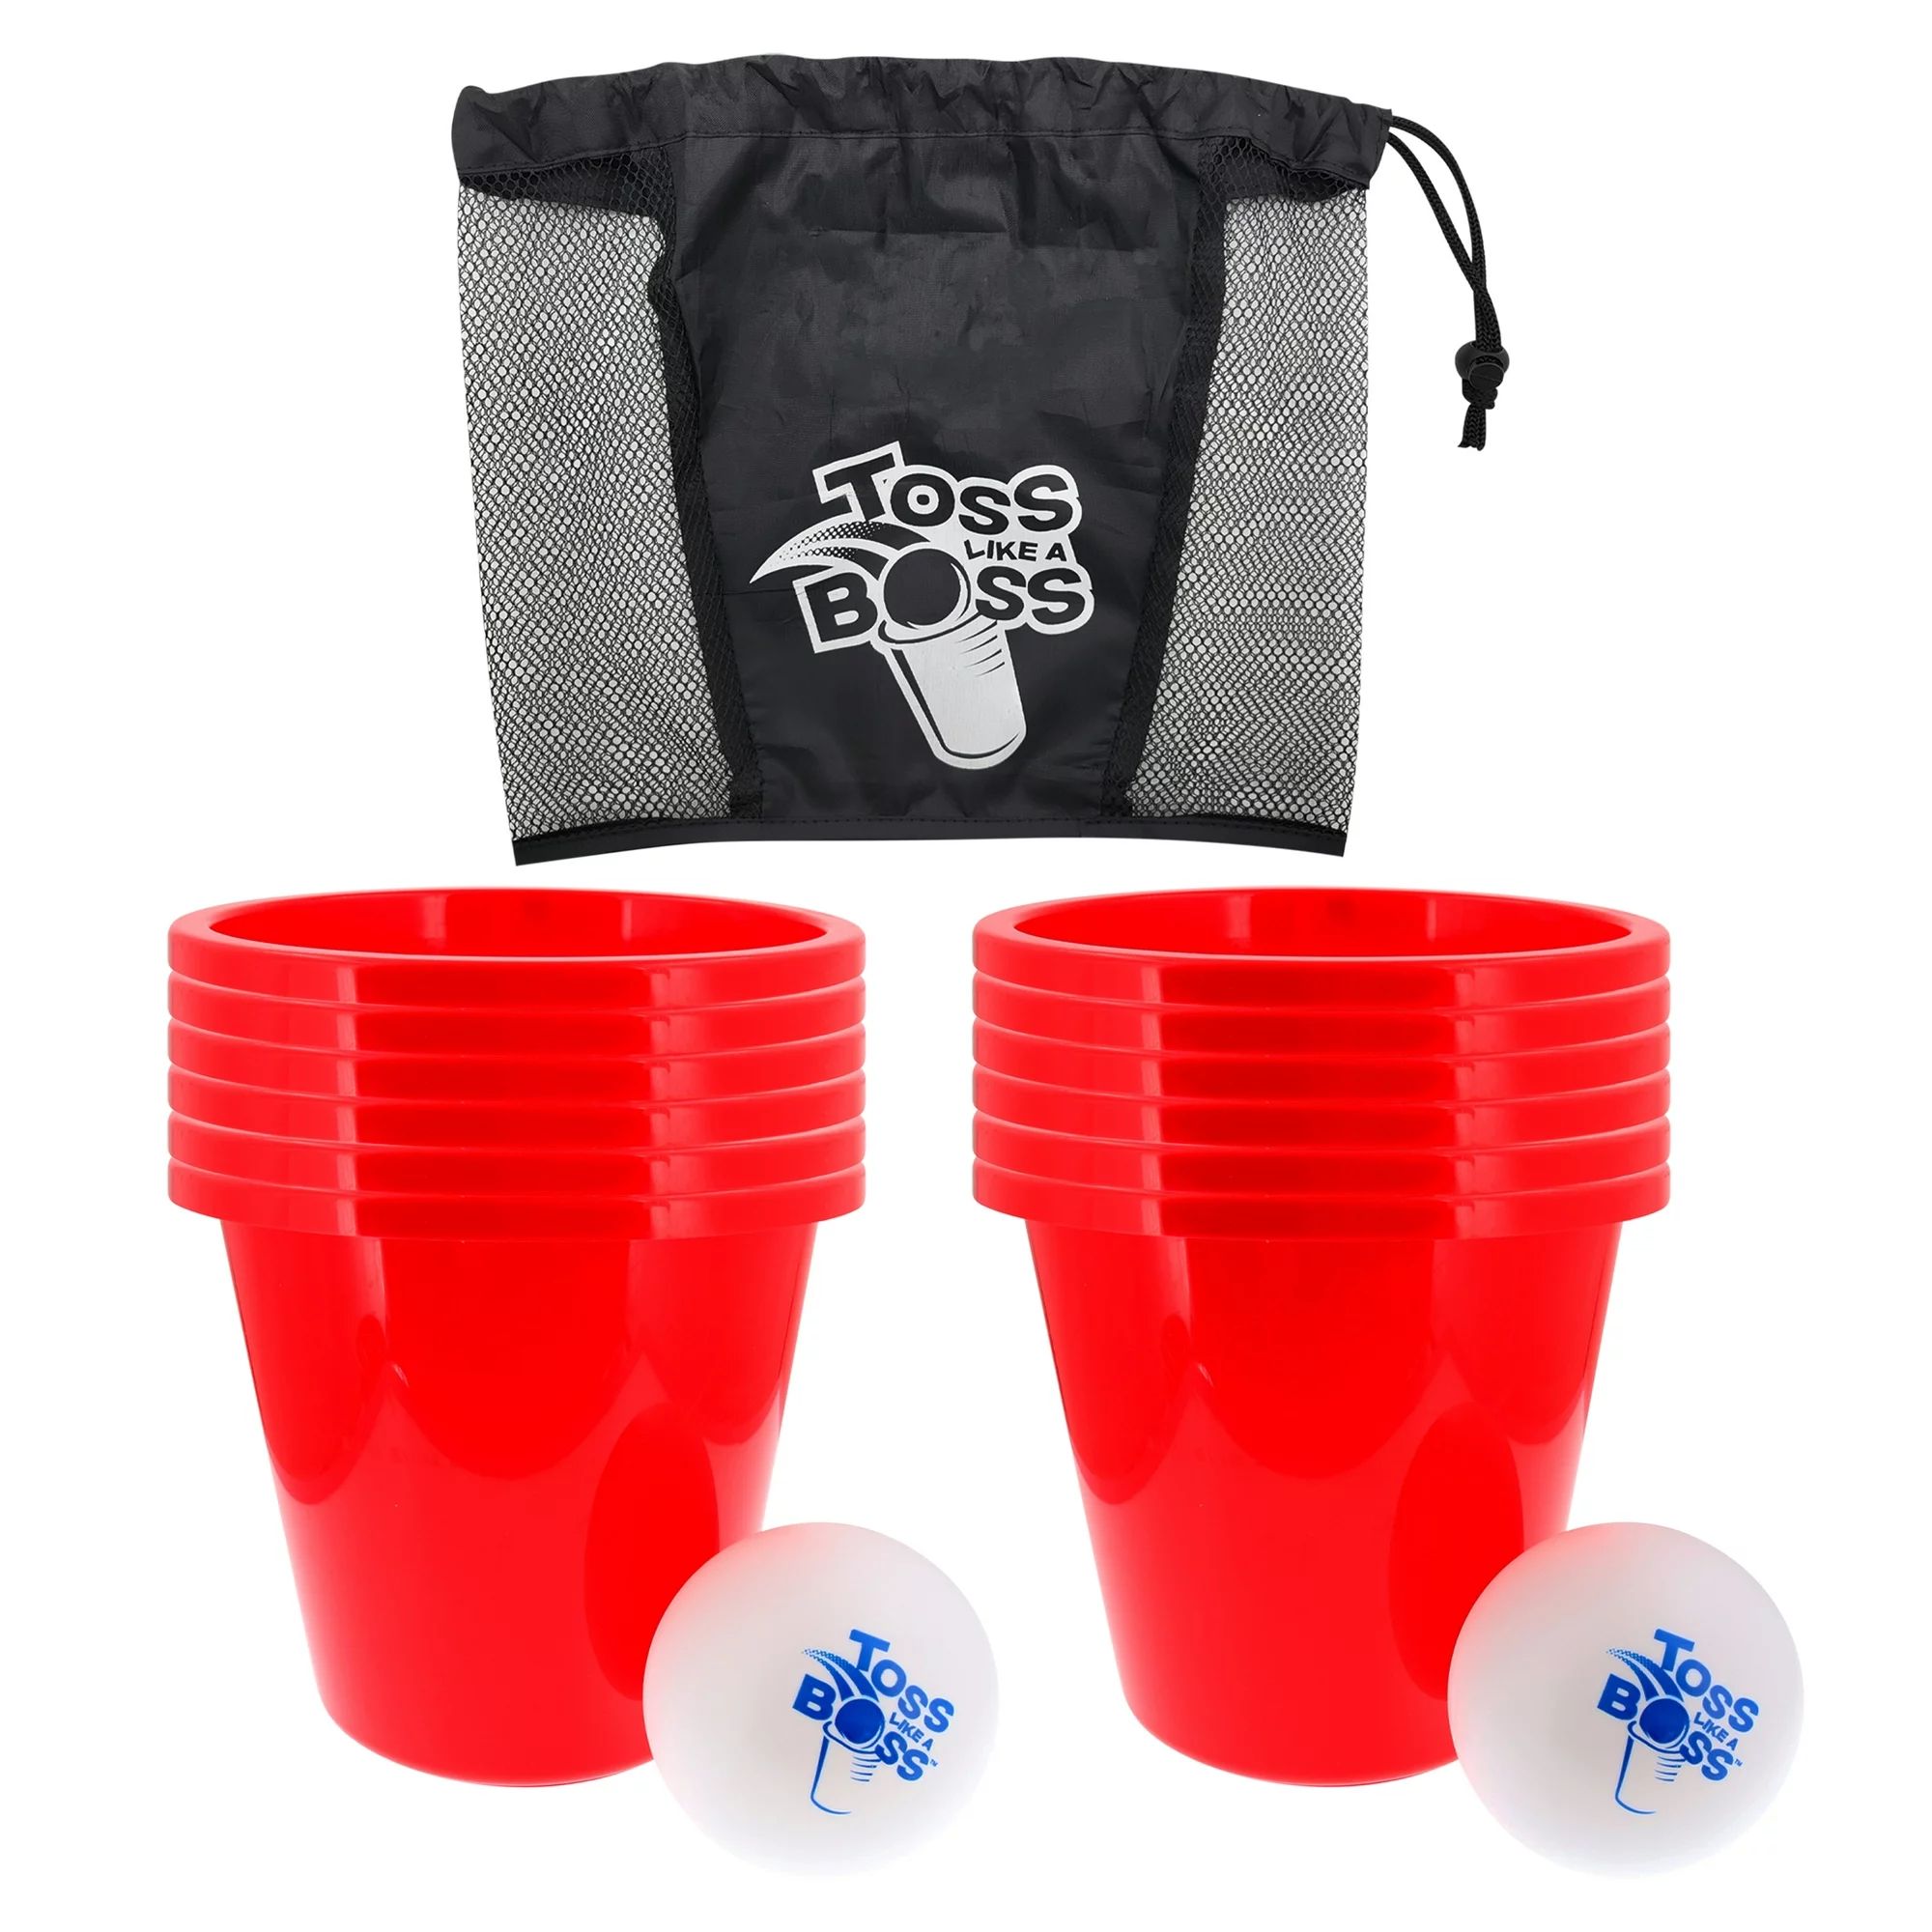 Banzai Toss Like A Boss Outdoor Giant Pong Lawn Game with Drawstring Bag | Walmart (US)